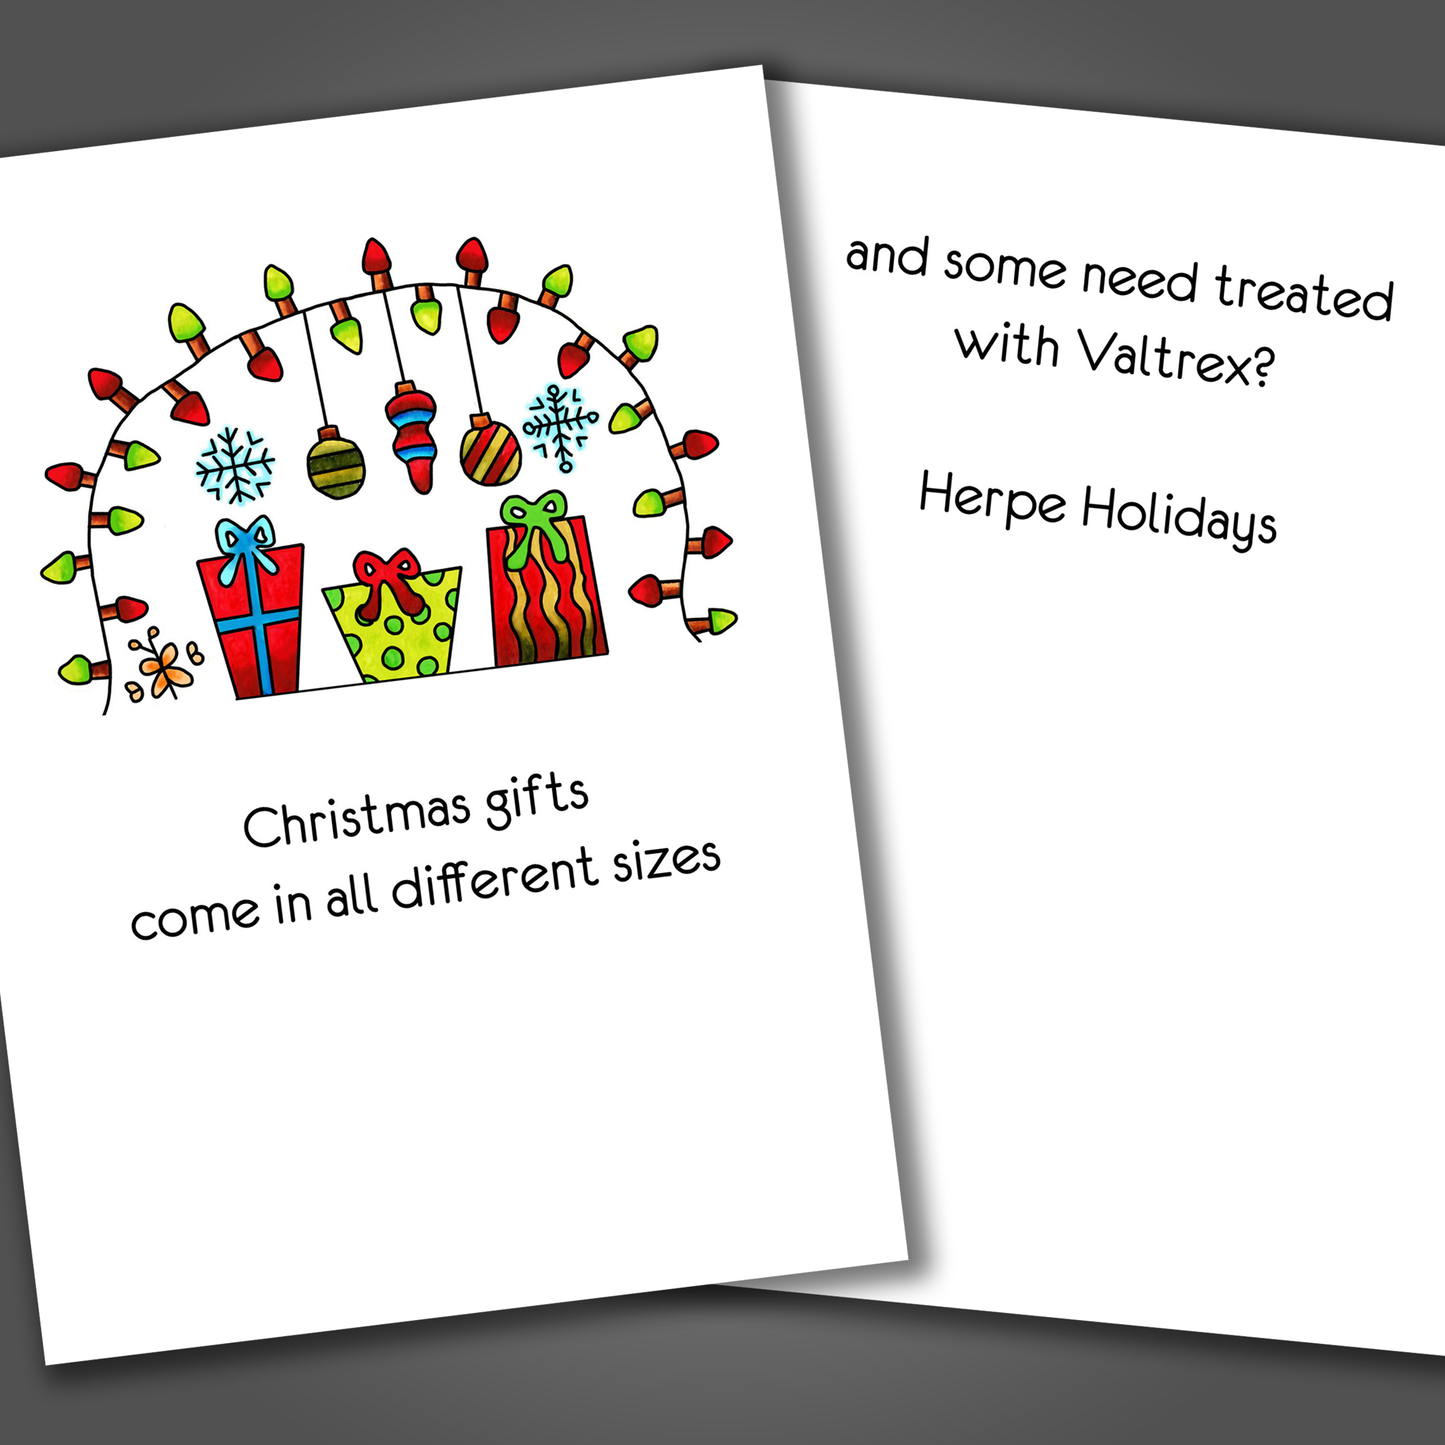 Funny Christmas card with gifts and lights on the front. Inside the card is a funny joke that ends with Herpe Holidays!